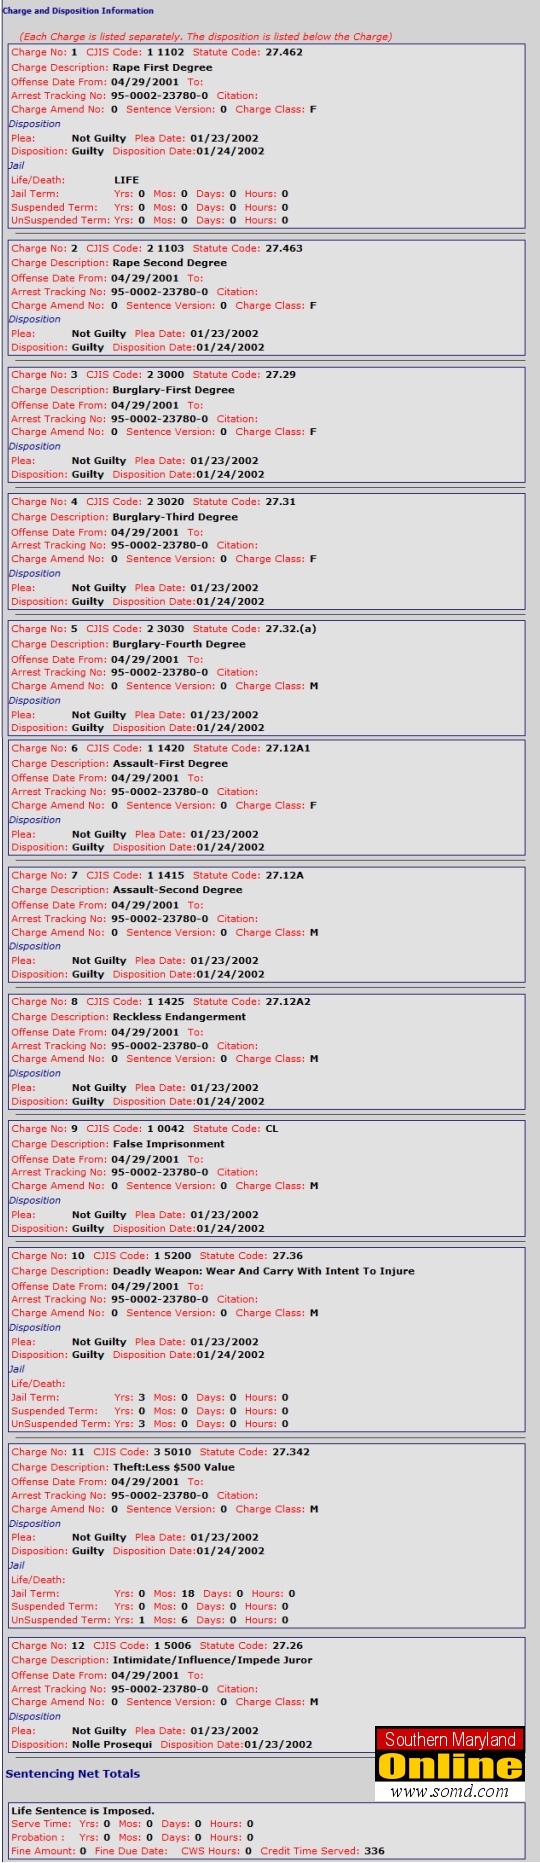 The list of charges against the deceased, Glenn Edward Smith, which resulted in his life sentence. (Source: Maryland State Judiciary Database)